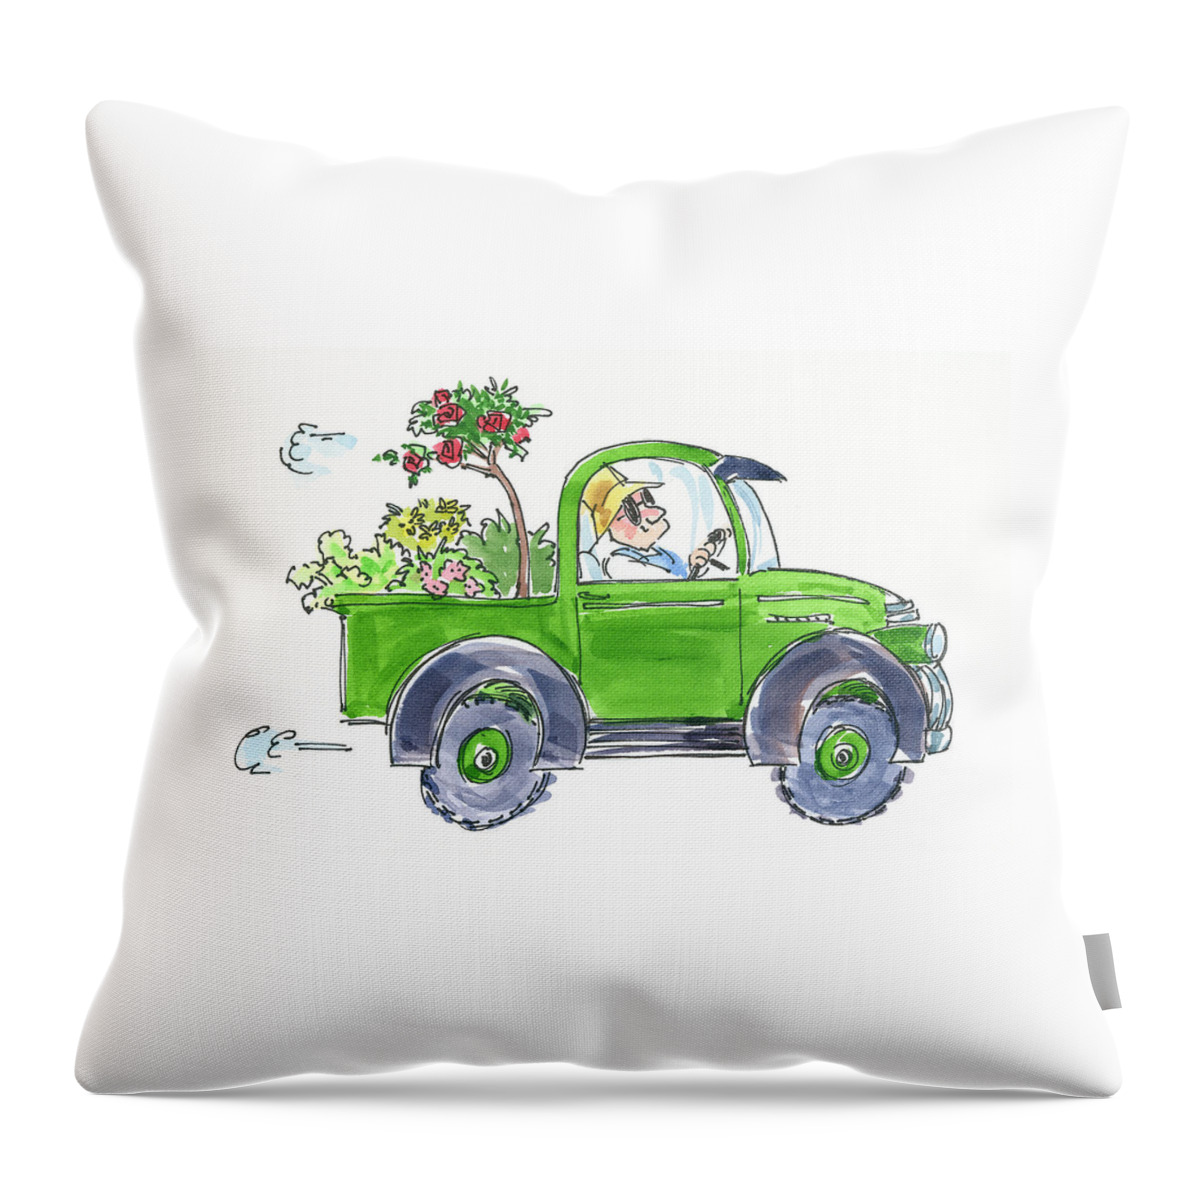 Plants Throw Pillow featuring the painting Plant Delivery by Garden Gate magazine